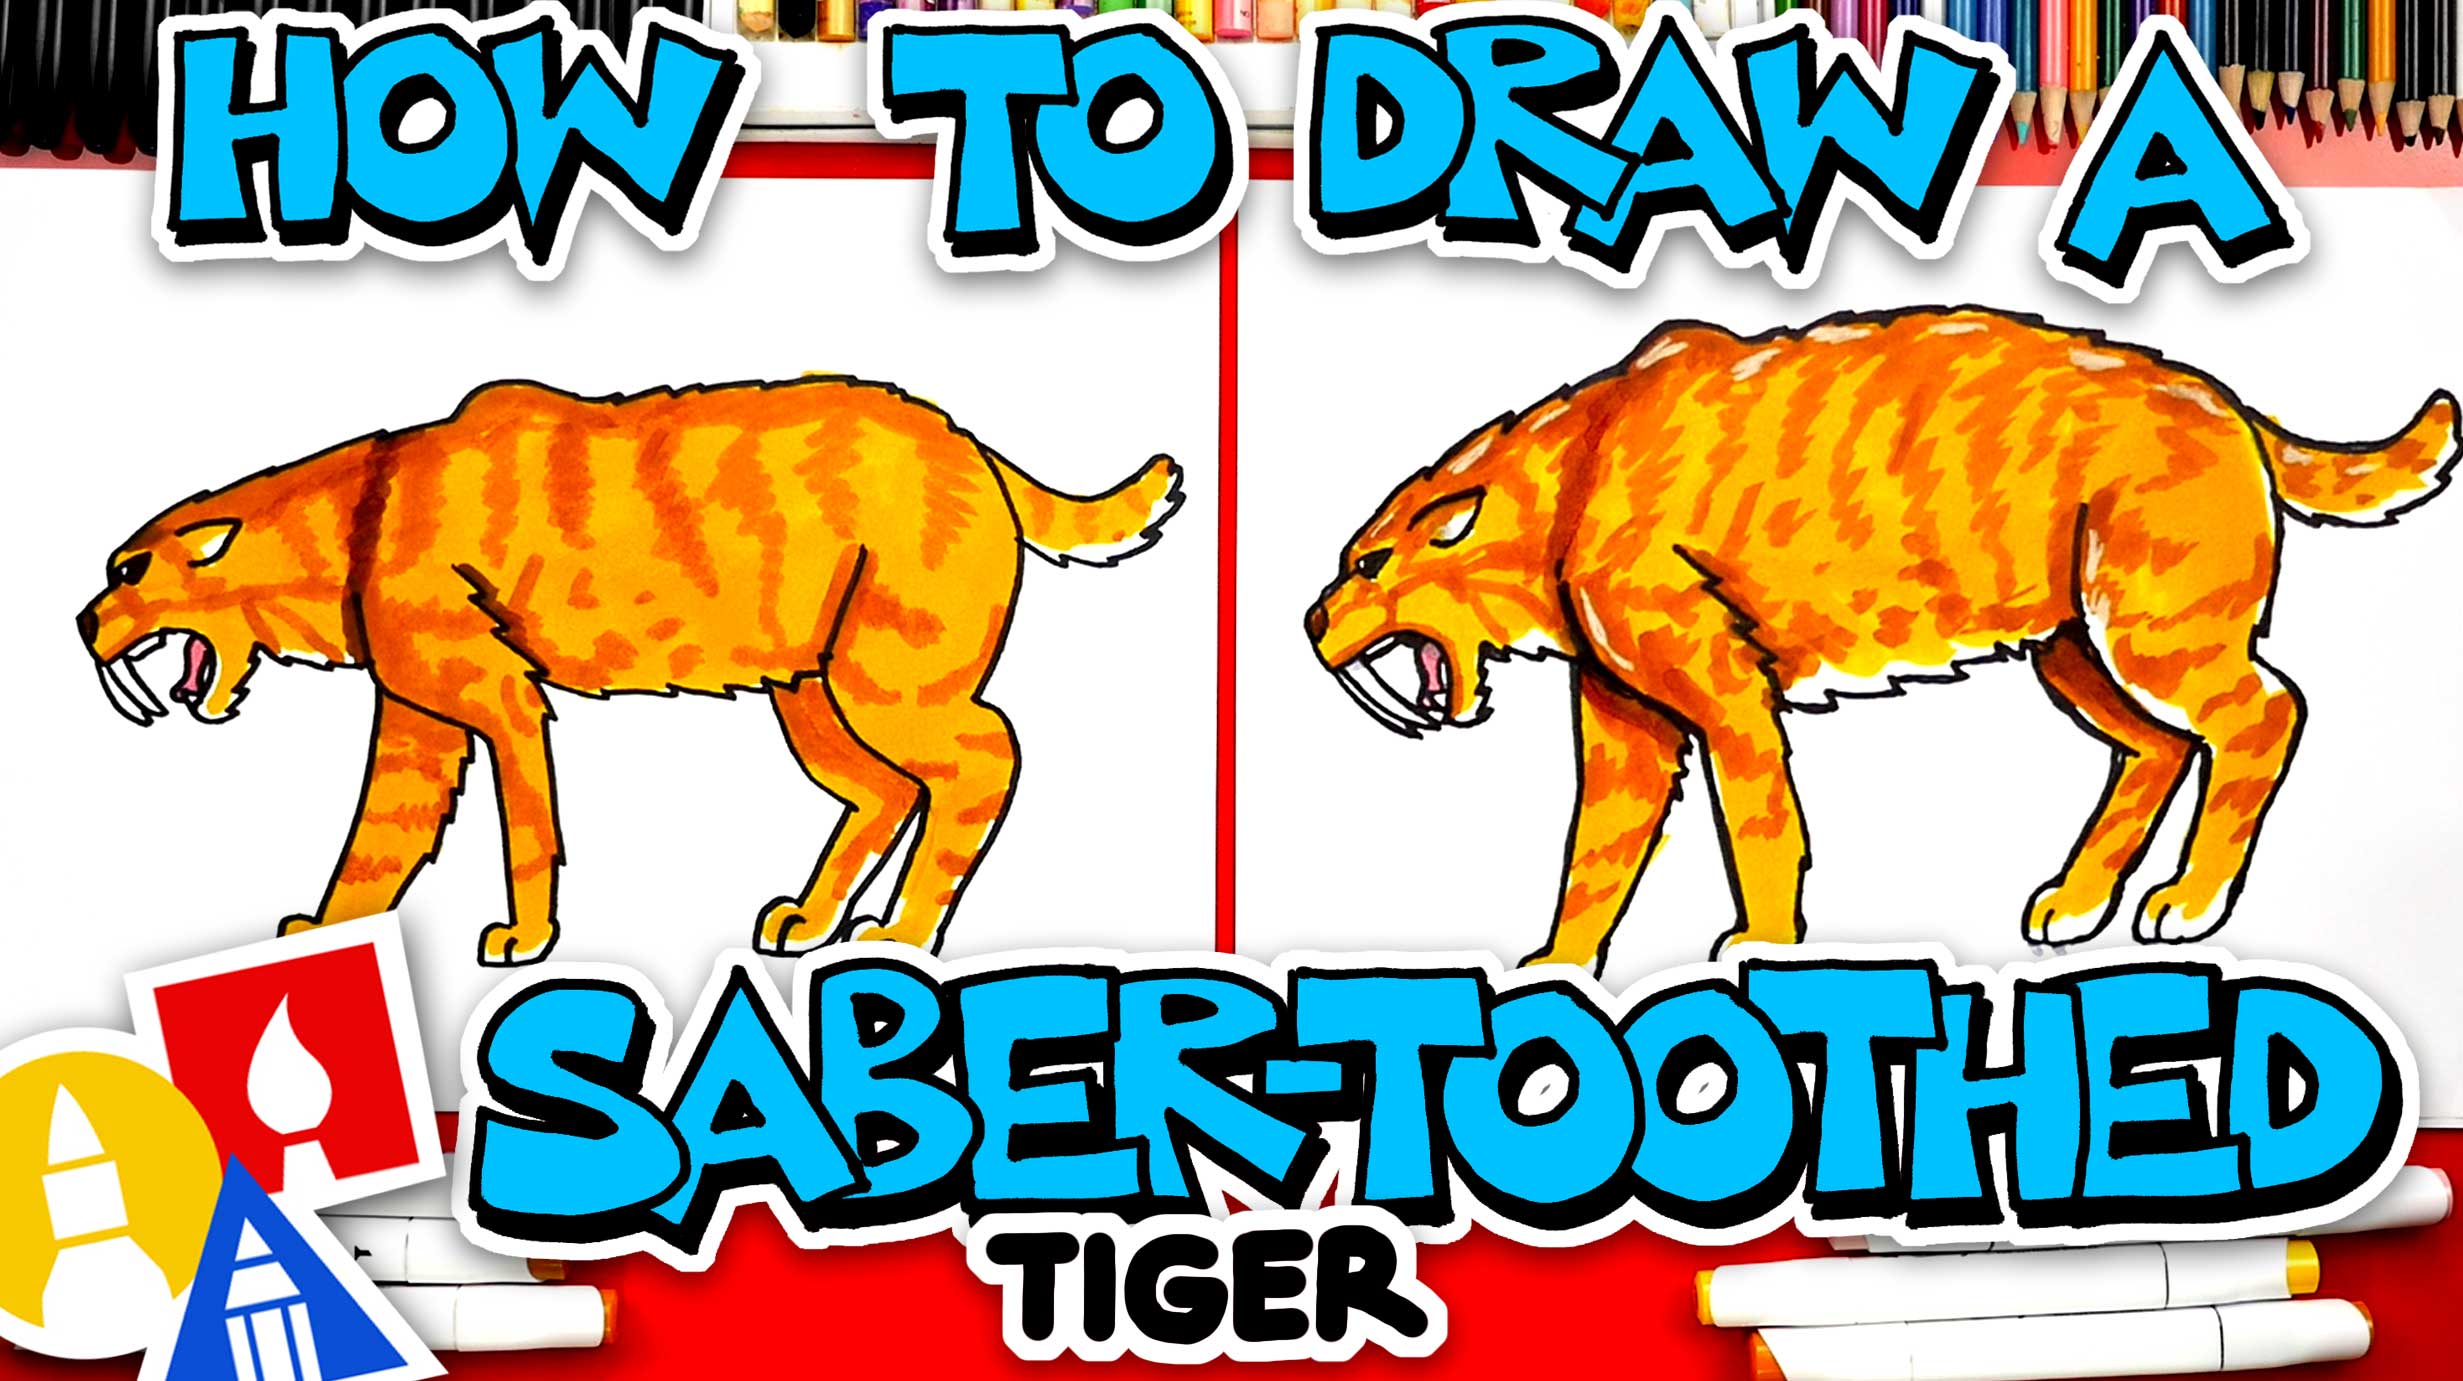 How To Draw A SaberToothed Tiger (Smilodon)